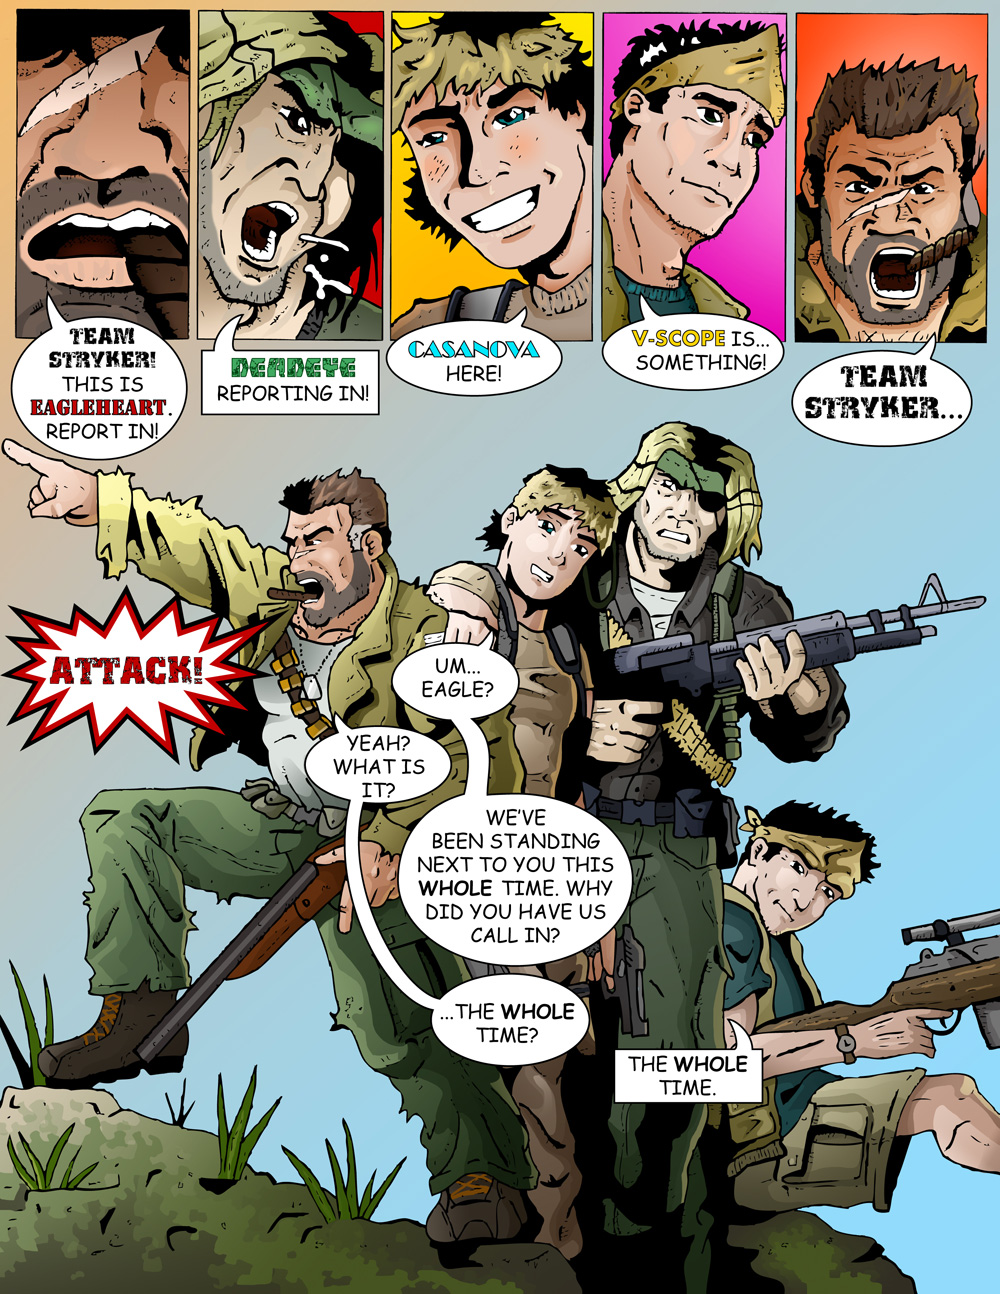 MISSION 001: PAGE 01 “TEAM STRYKER ATTACK!”